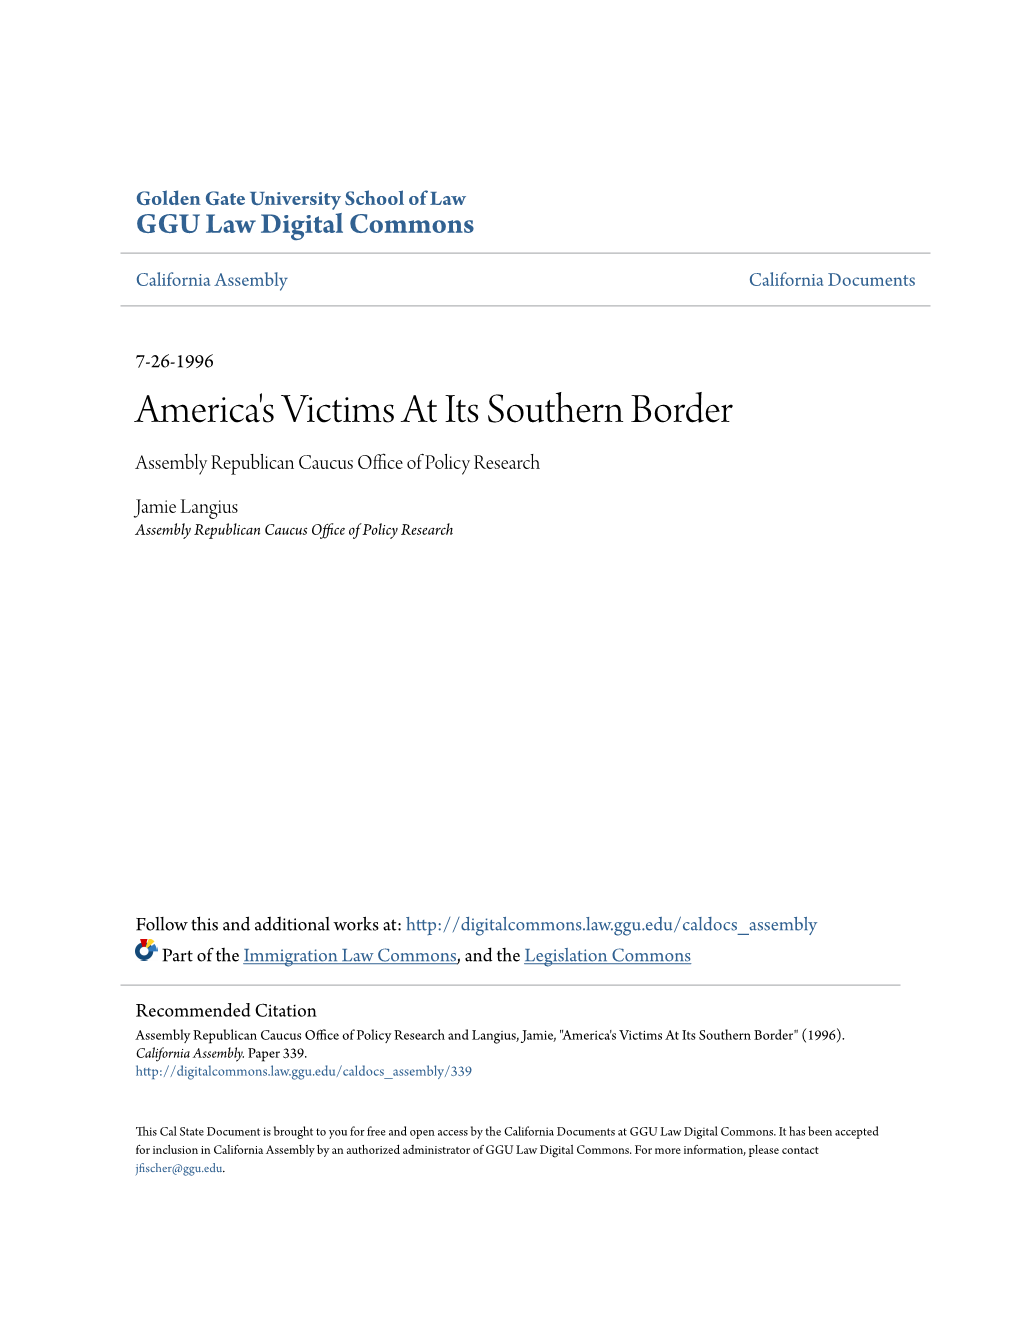 America's Victims at Its Southern Border Assembly Republican Caucus Office Ofolic P Y Research